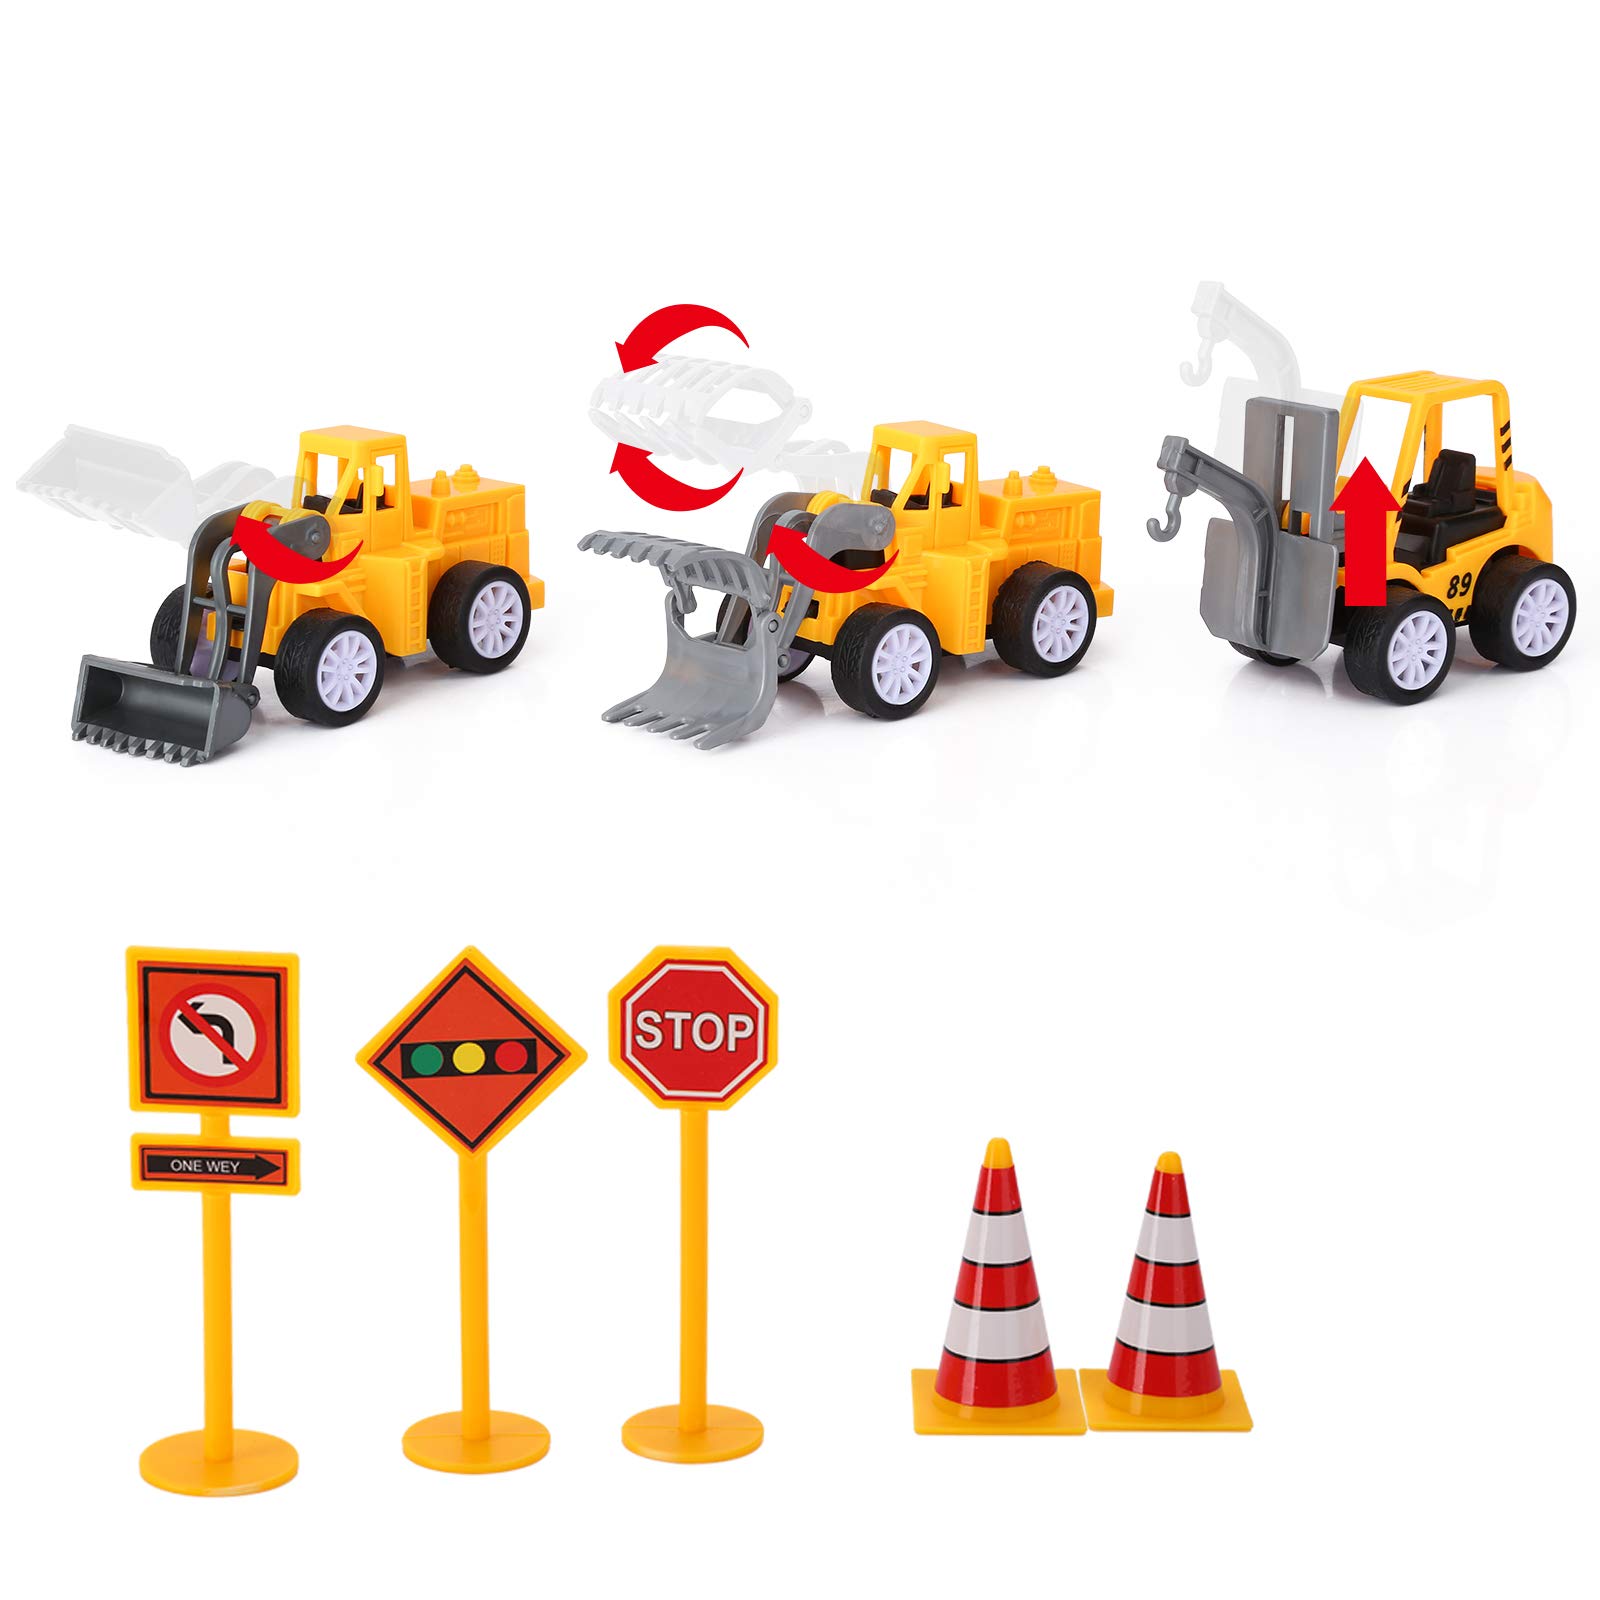 haomsj 17PCS Construction Party Favors Birthday Party Supplies Mini Small Construction Toys Trucks Vehicle Cake Decorations Topper Toy Cars Trucks for 2 3 4 5 7 Year Old Boys